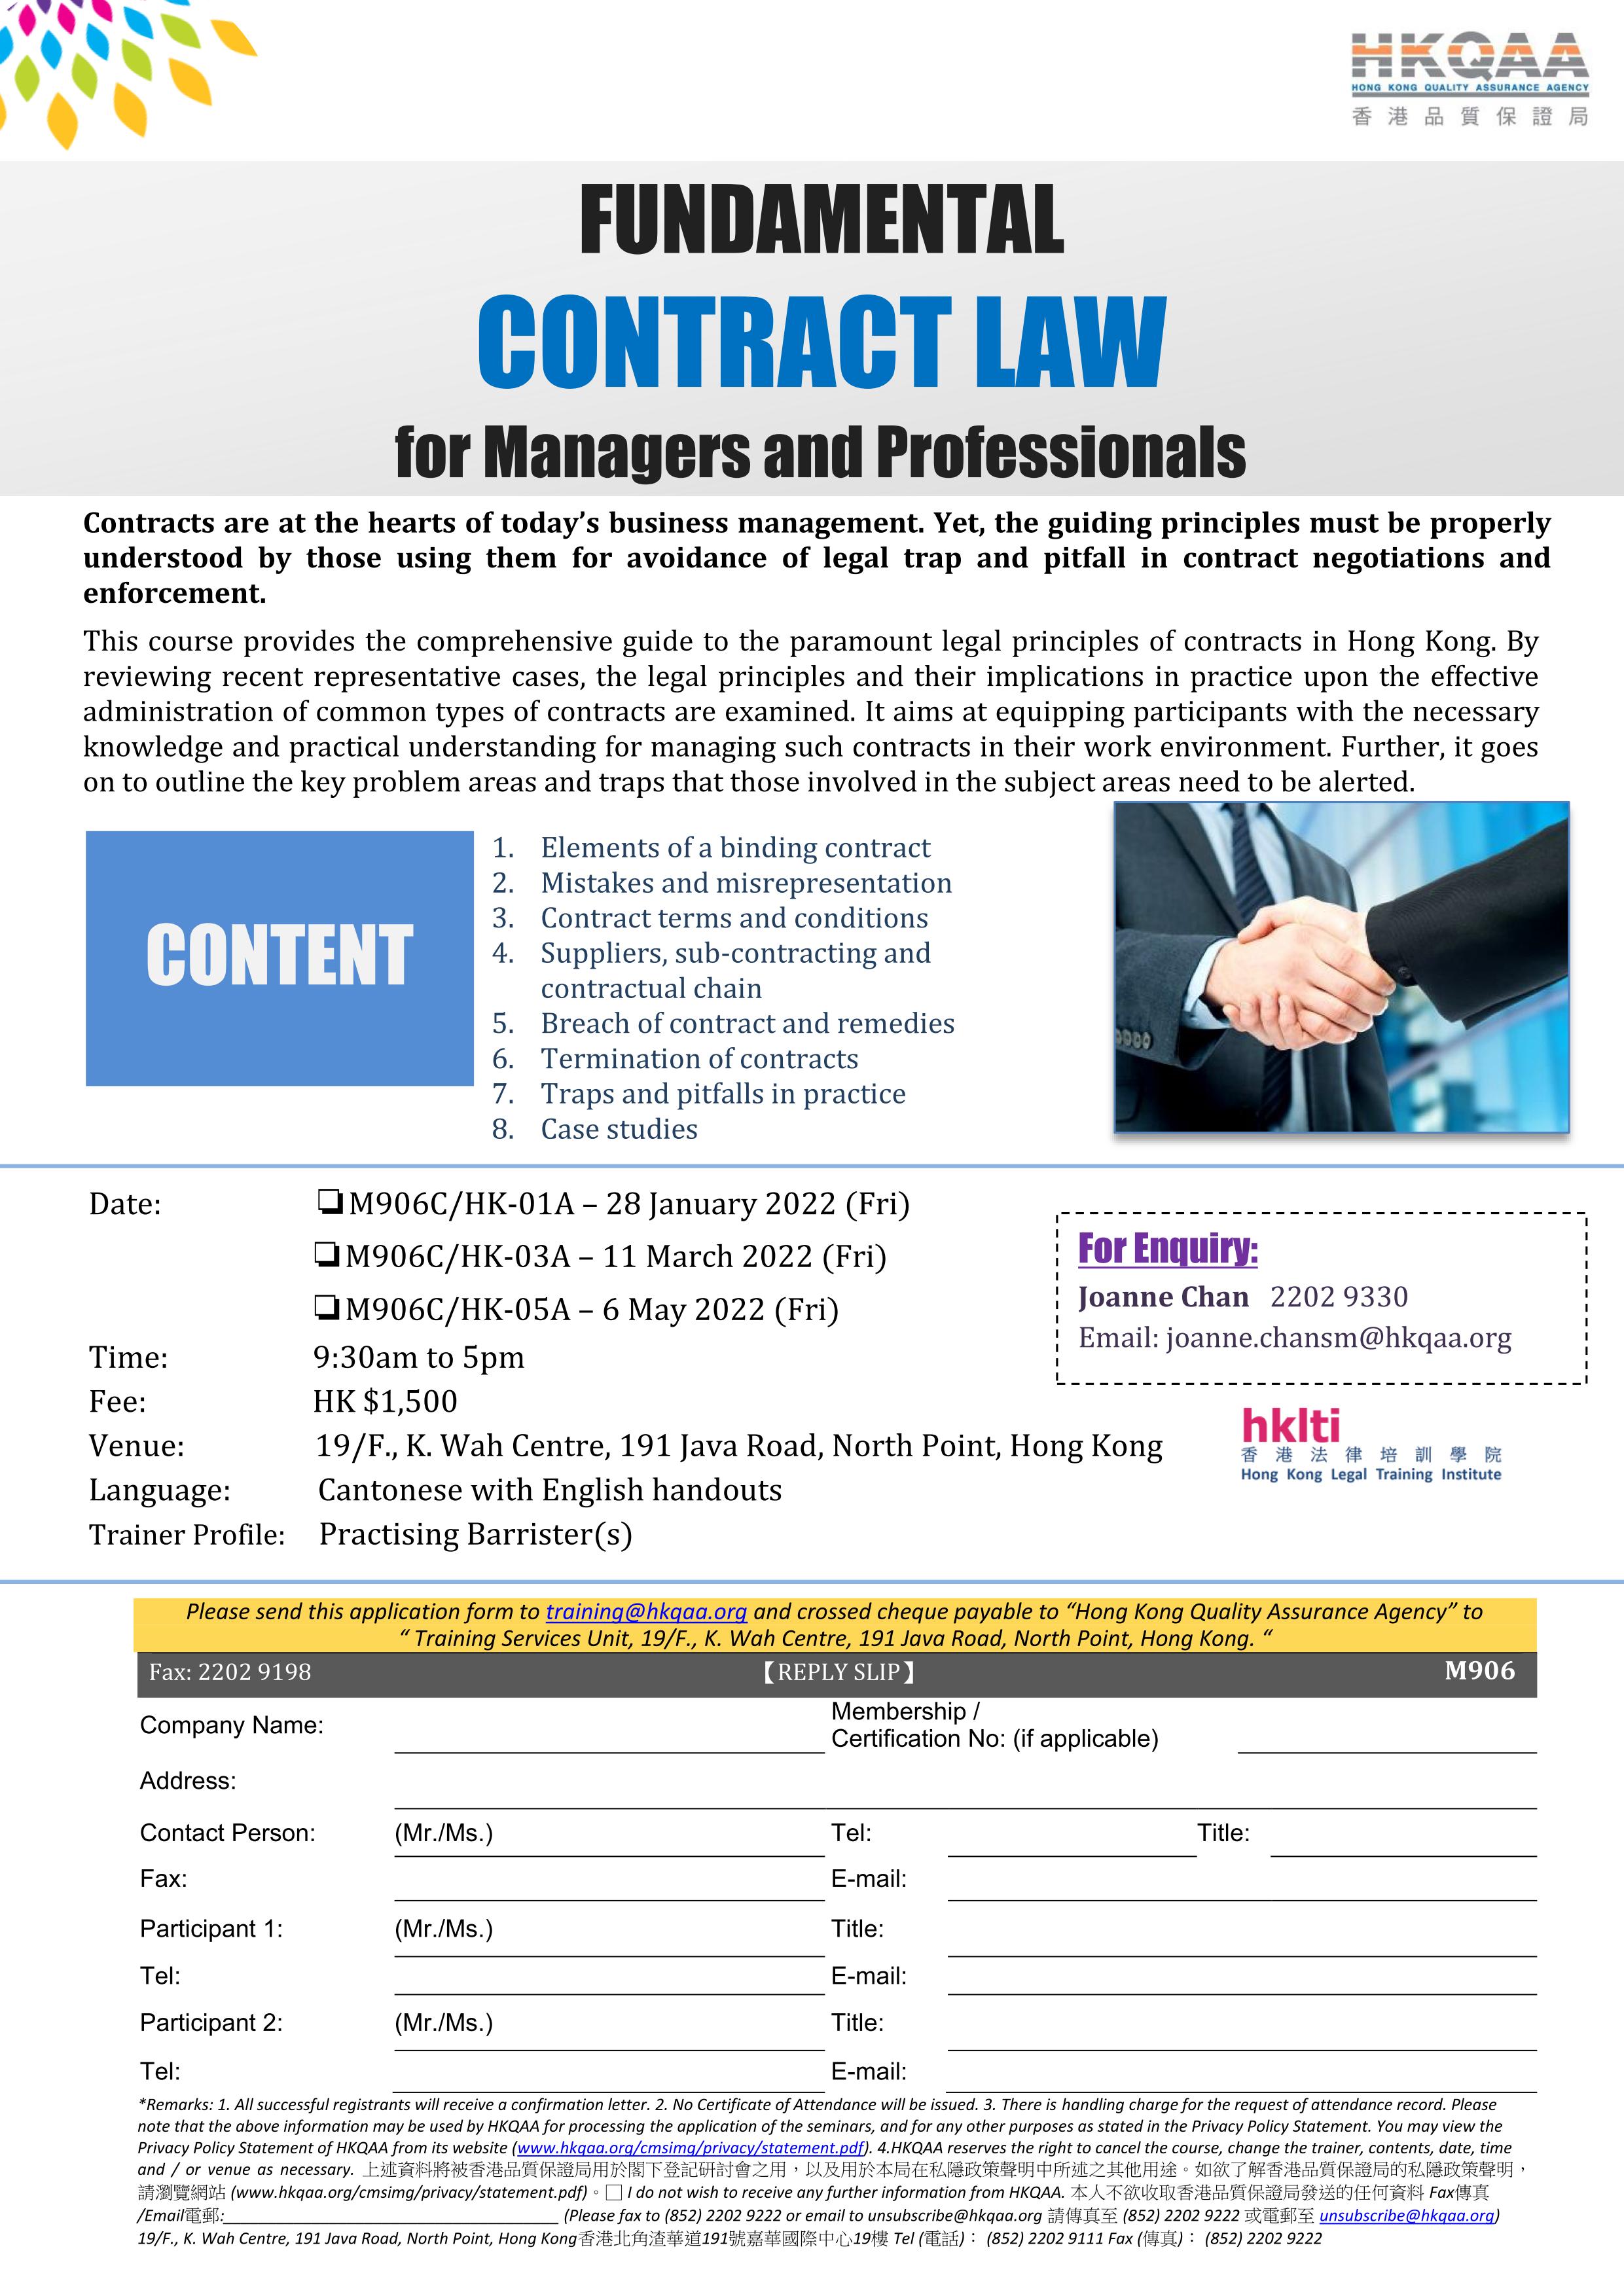 M906 2022 JAN JUN   Fundamental Contract Law for Managers and Professionals ENG short 1